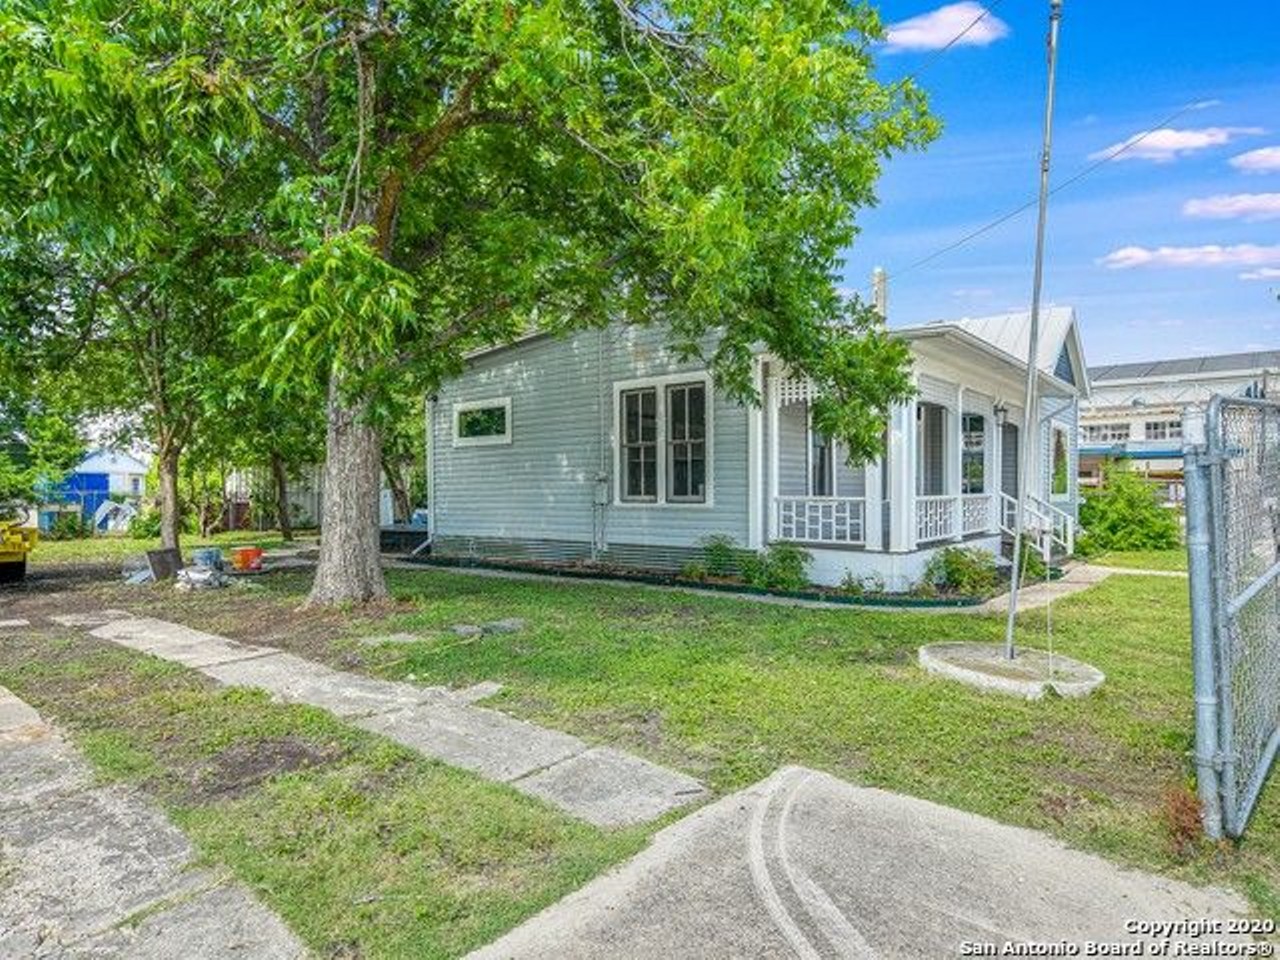 This 1897 Bungalow Might Be the Cutest Little House for Sale in San Antonio Right Now